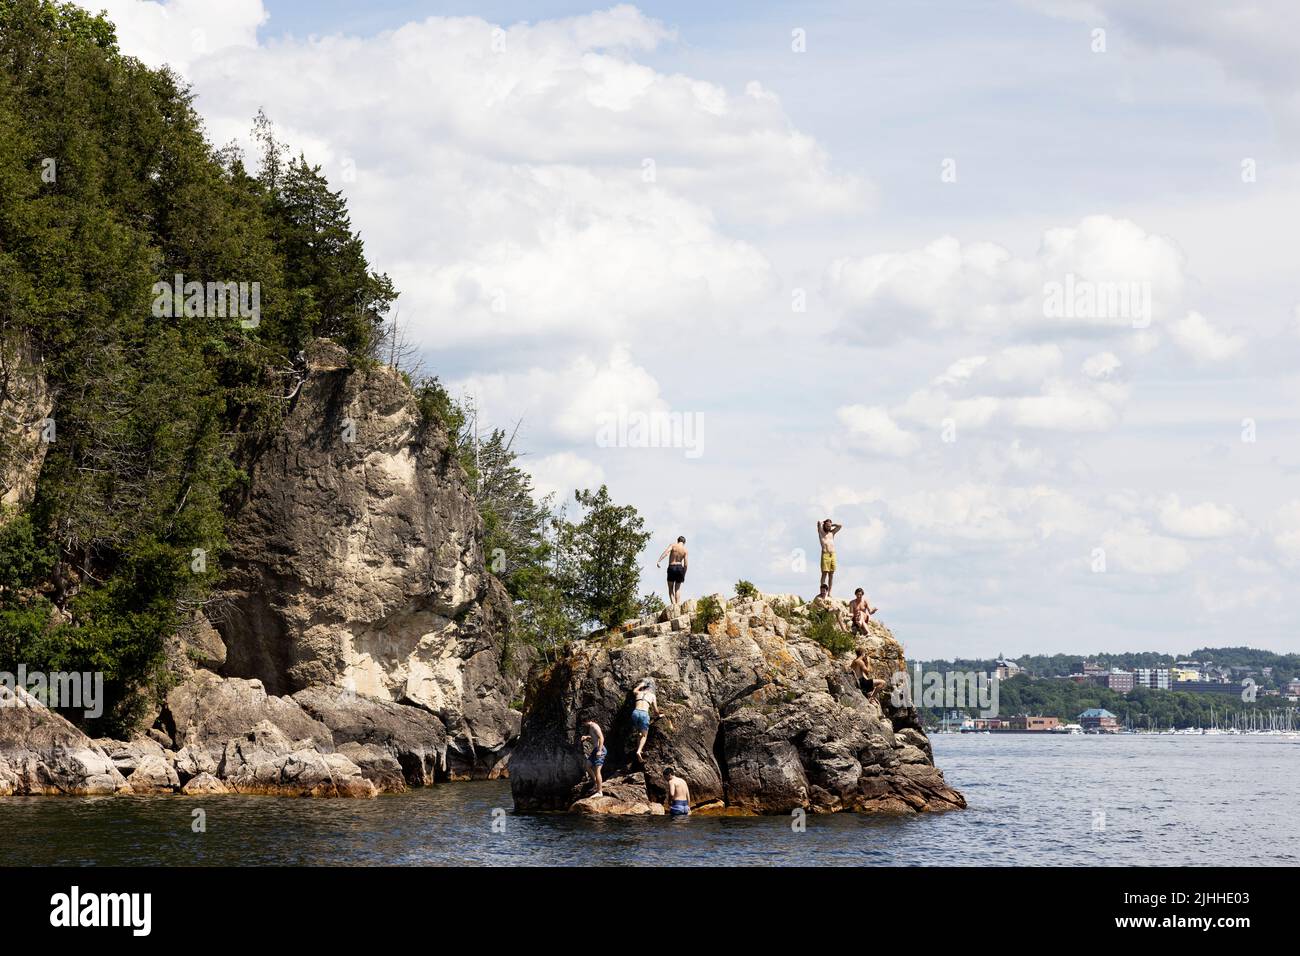 Swimmers and divers on a summer day at Lone Rock Point on Lake Champlain in Burlington, Vermont, USA. Stock Photo